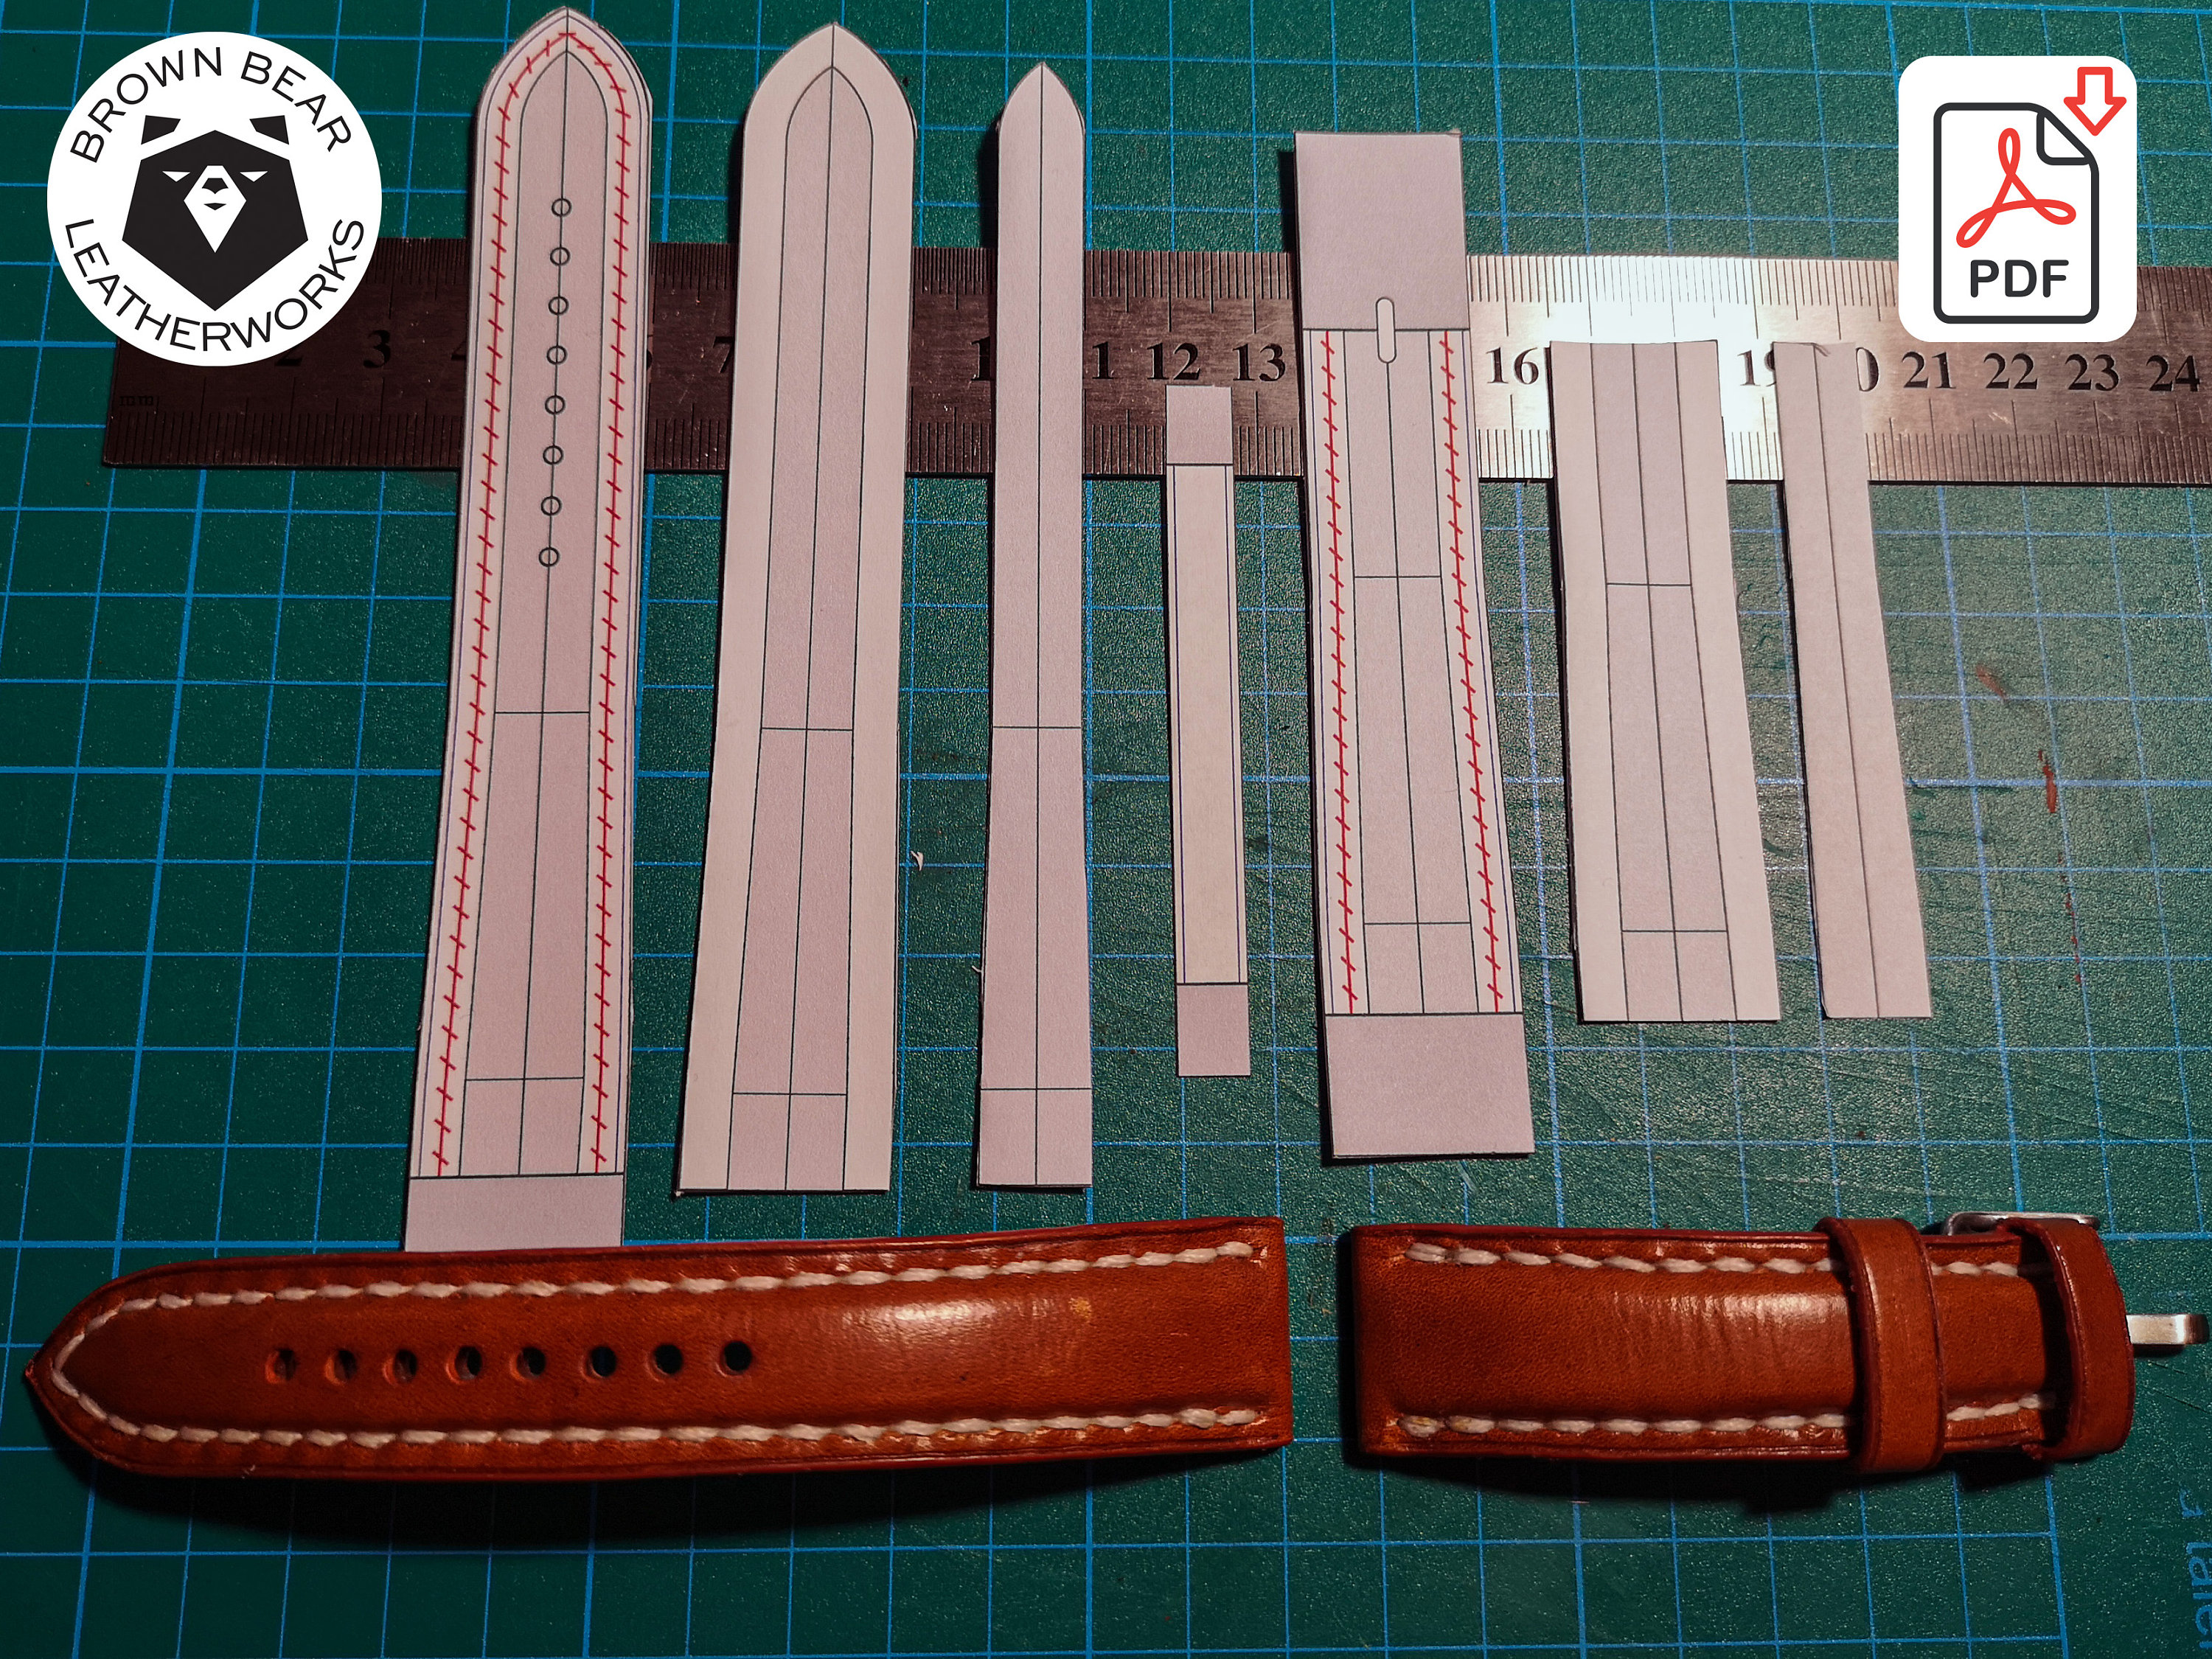 18-printable-watch-strap-templates-18-20-22mm-3-sizes-etsy